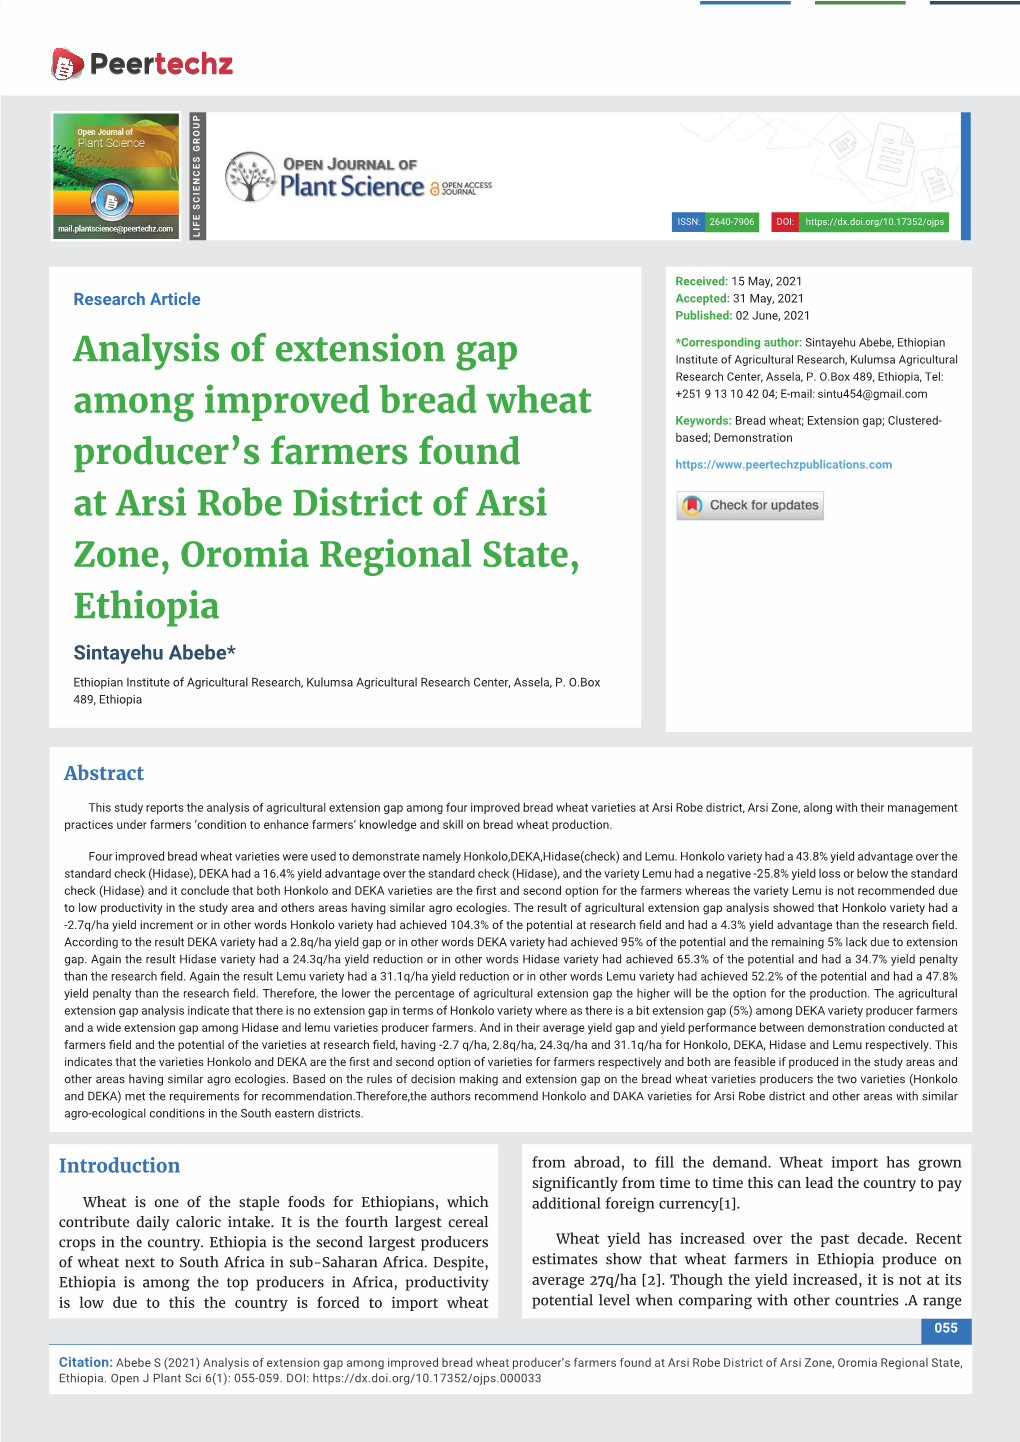 Analysis of Extension Gap Among Improved Bread Wheat Producer's